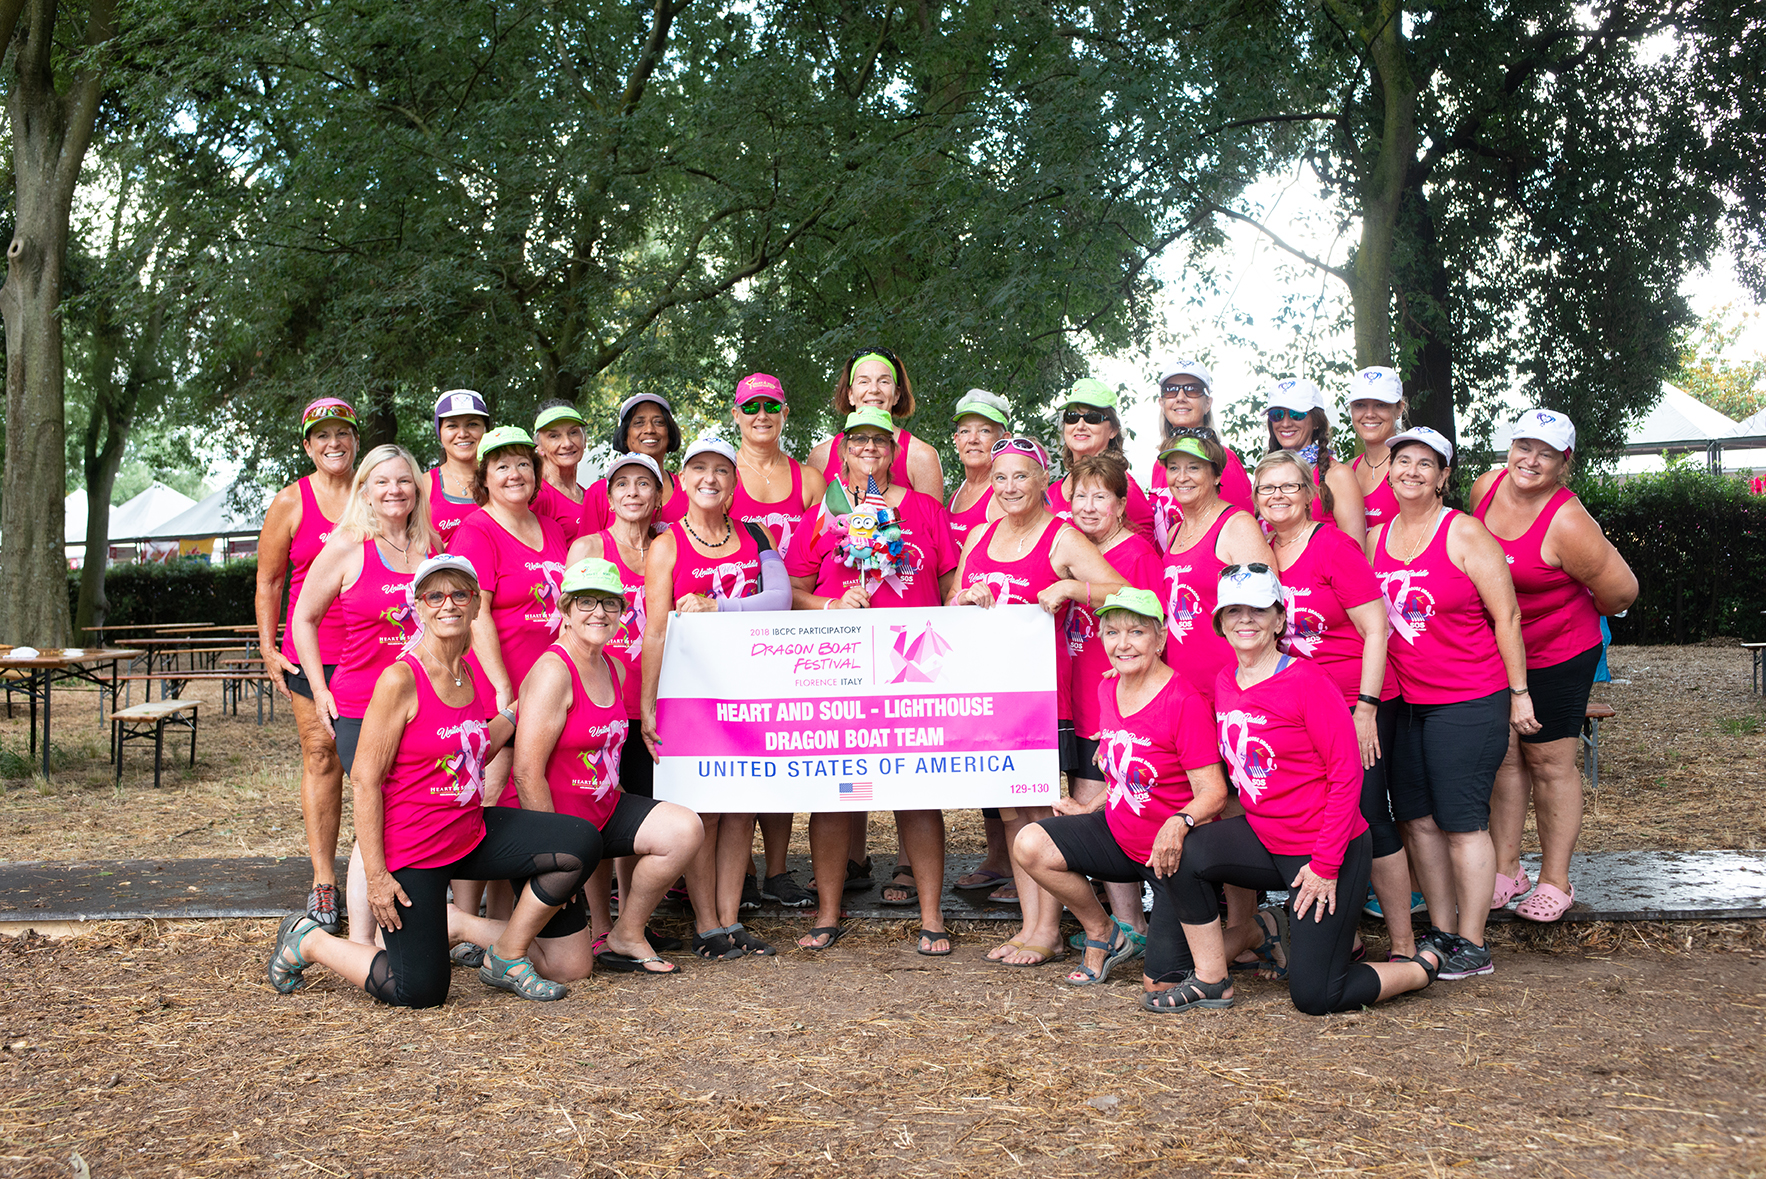 Heart and Soul - Lighthouse Dragon Boat Team - USA